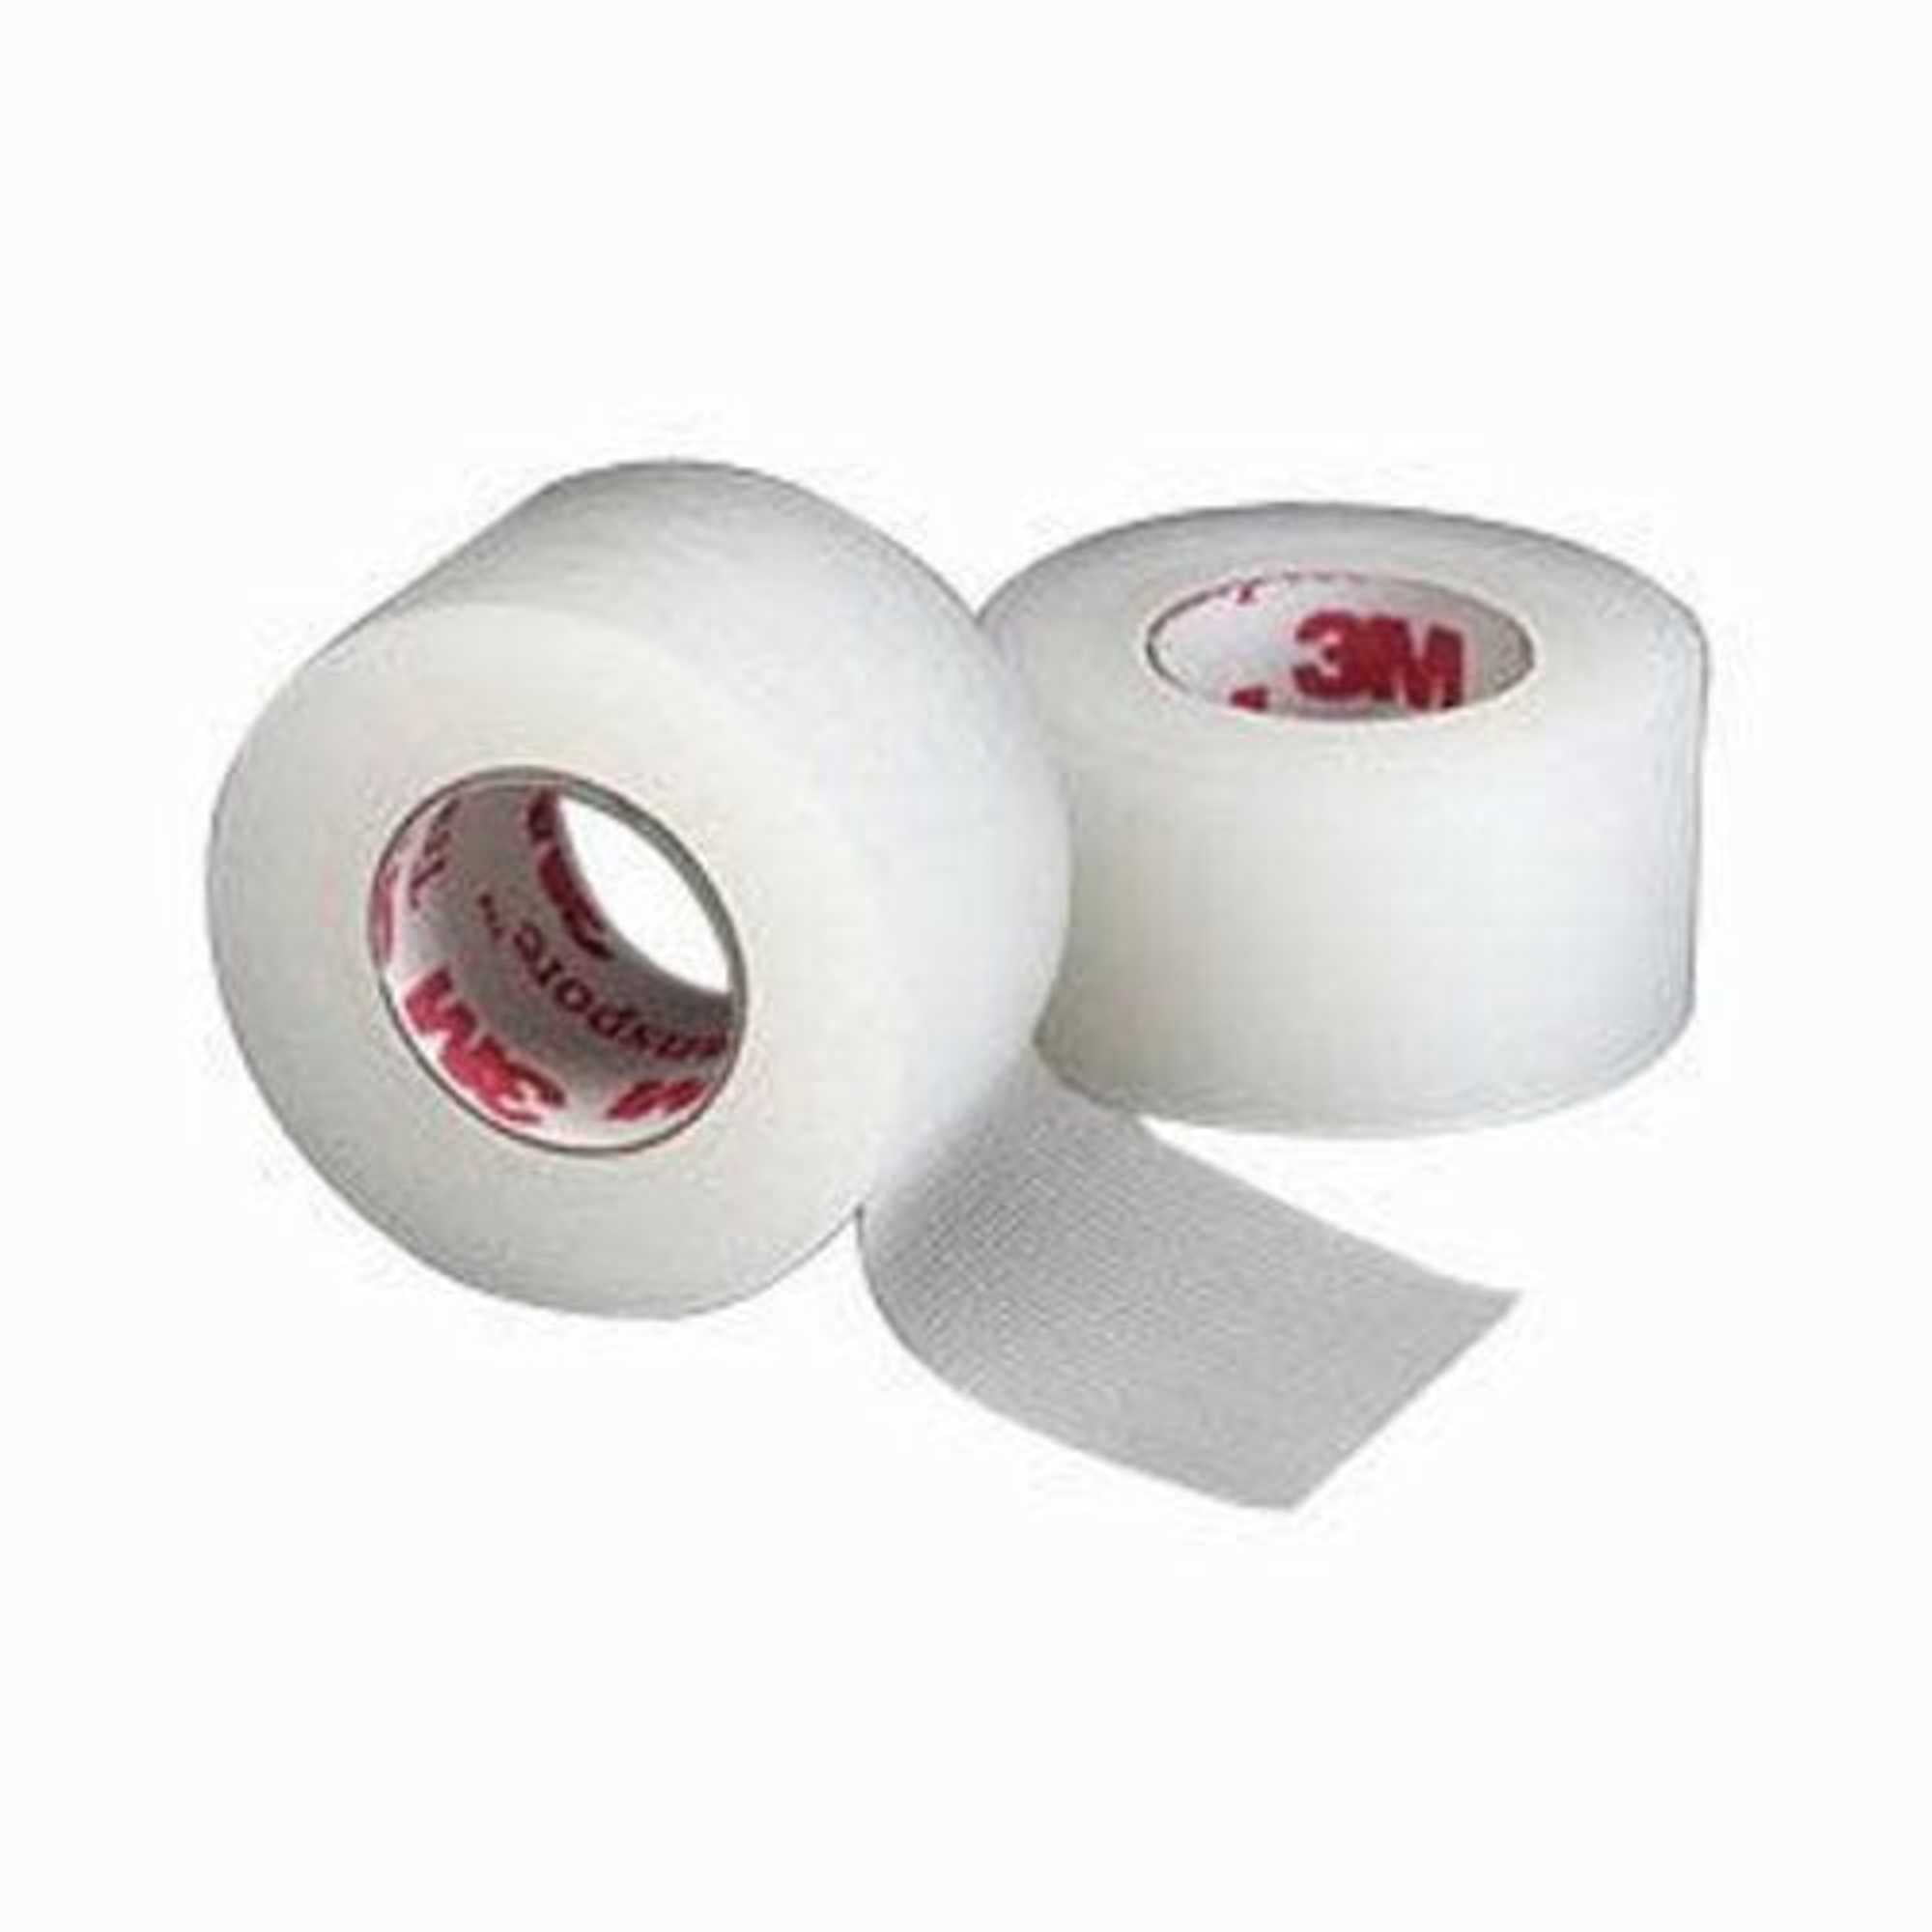 3M NEXCARE women transparent double sided safety tape 24 pcs fabric bra skin 